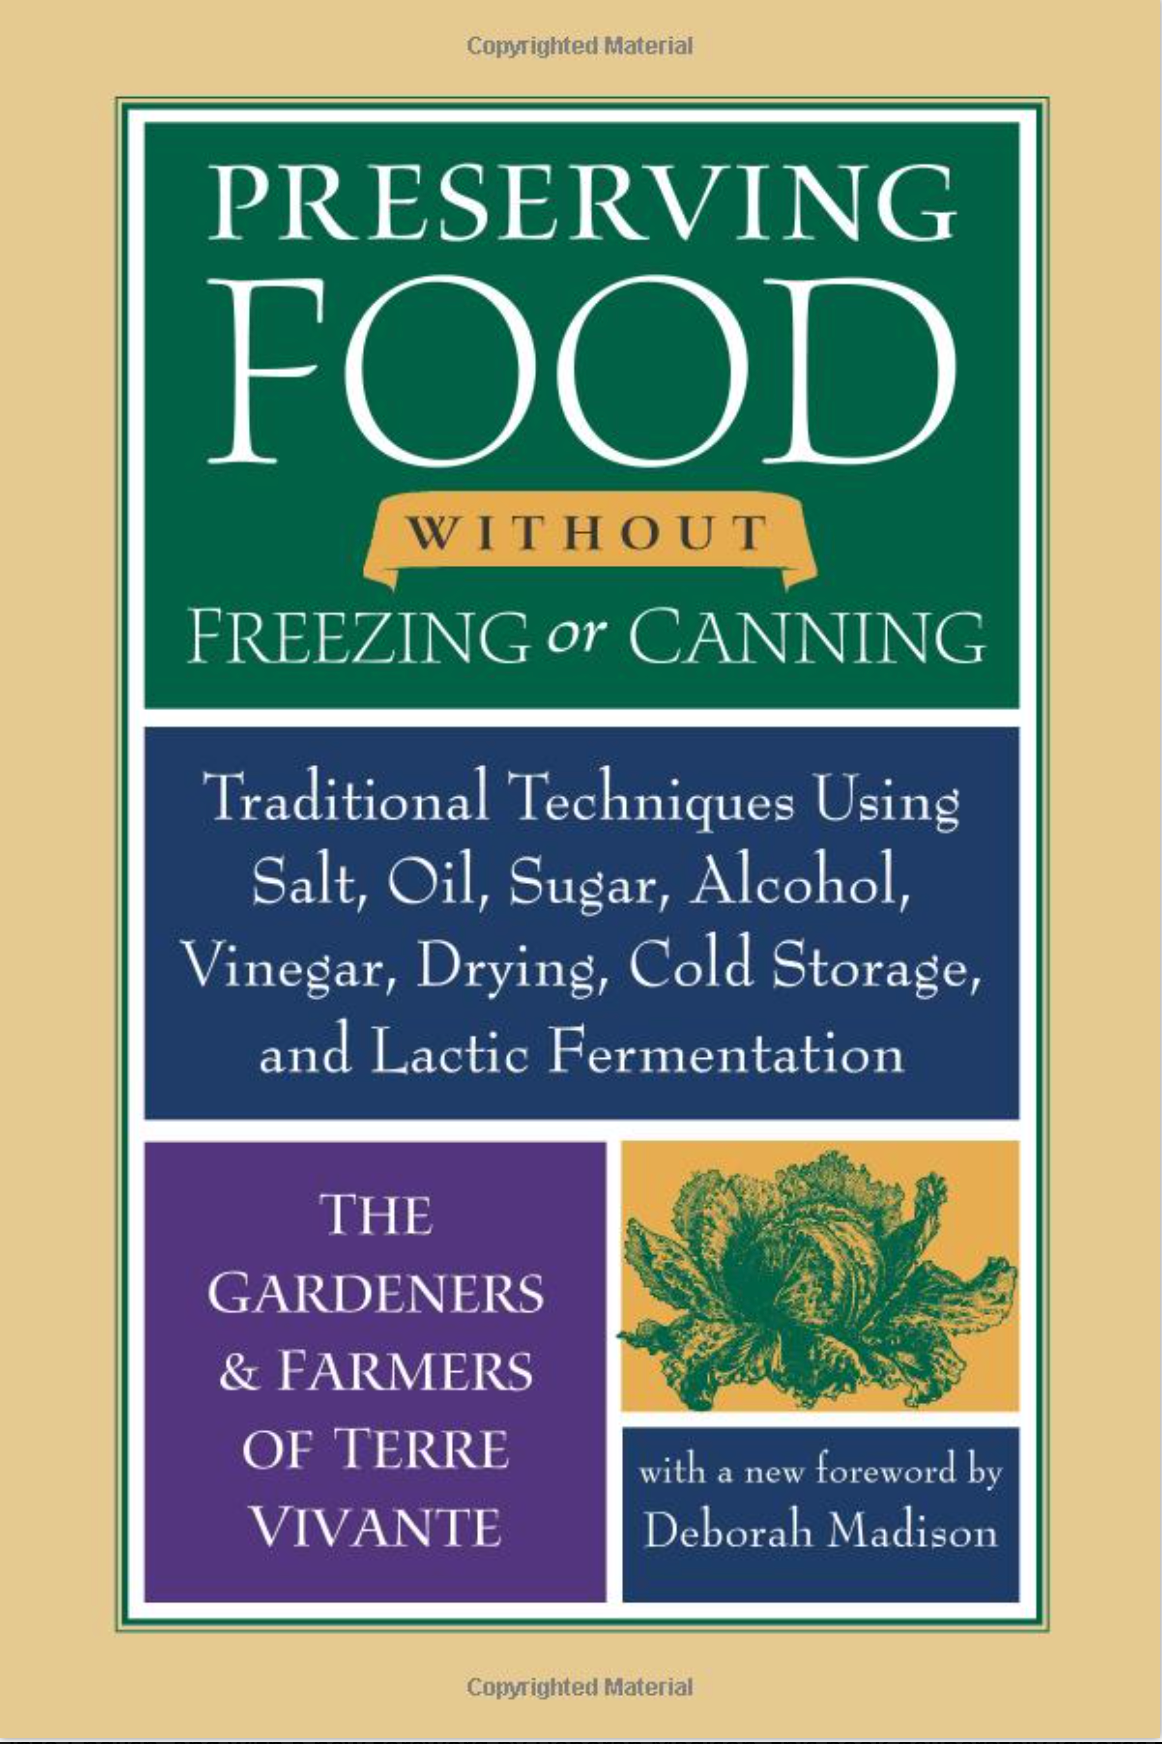 Preserving Food without Freezing or Canning: Traditional Techniques Using Salt, Oil, Sugar, Alcohol, Vinegar, Drying, Cold Storage, and Lactic Fermentation - by The Gardeners and Farmers of Centre Terre Vivante